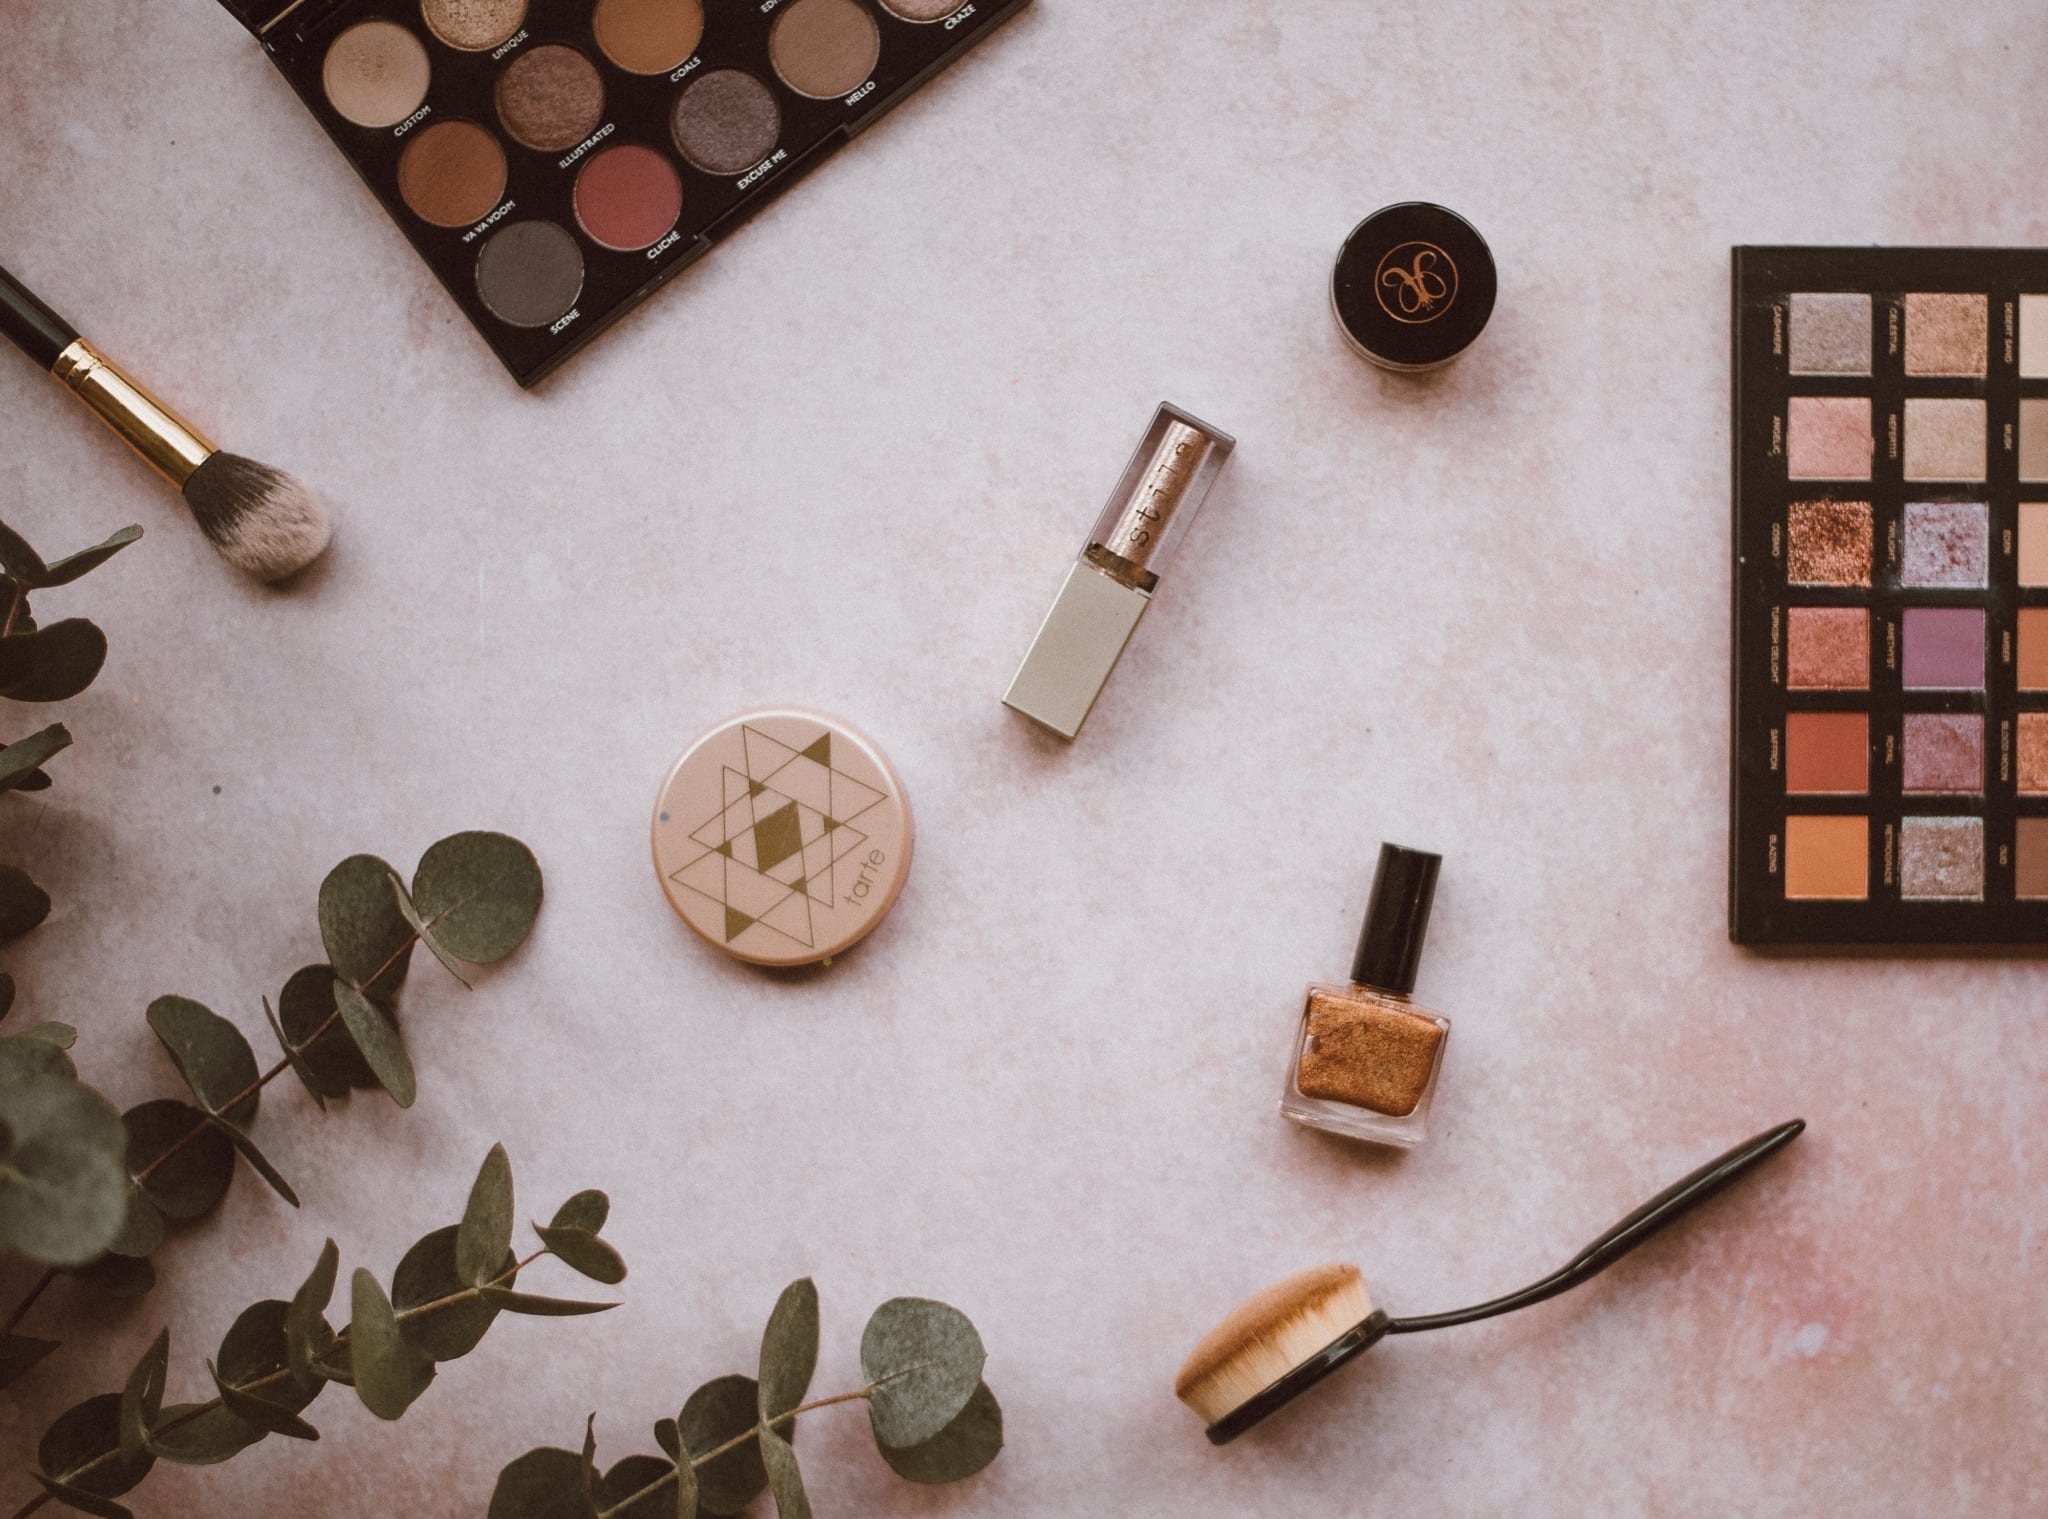 annie-spratt-466761-unsplash Fall Beauty Trends: What’s In Our Make Up Bag